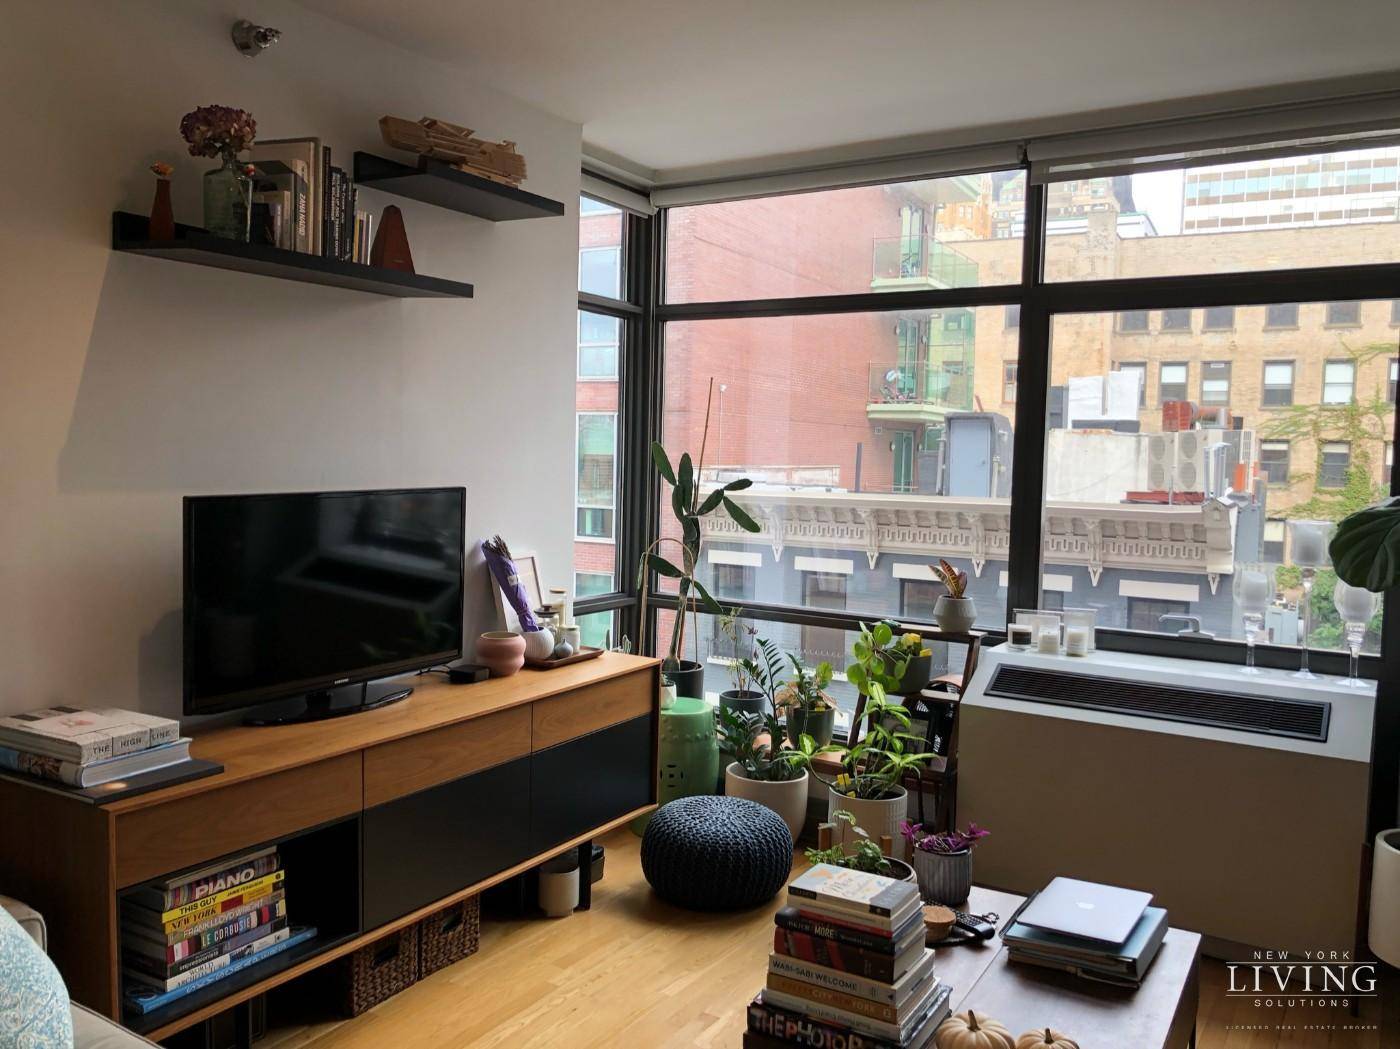 Below current market real 1 bed in Brooklyn Heights.